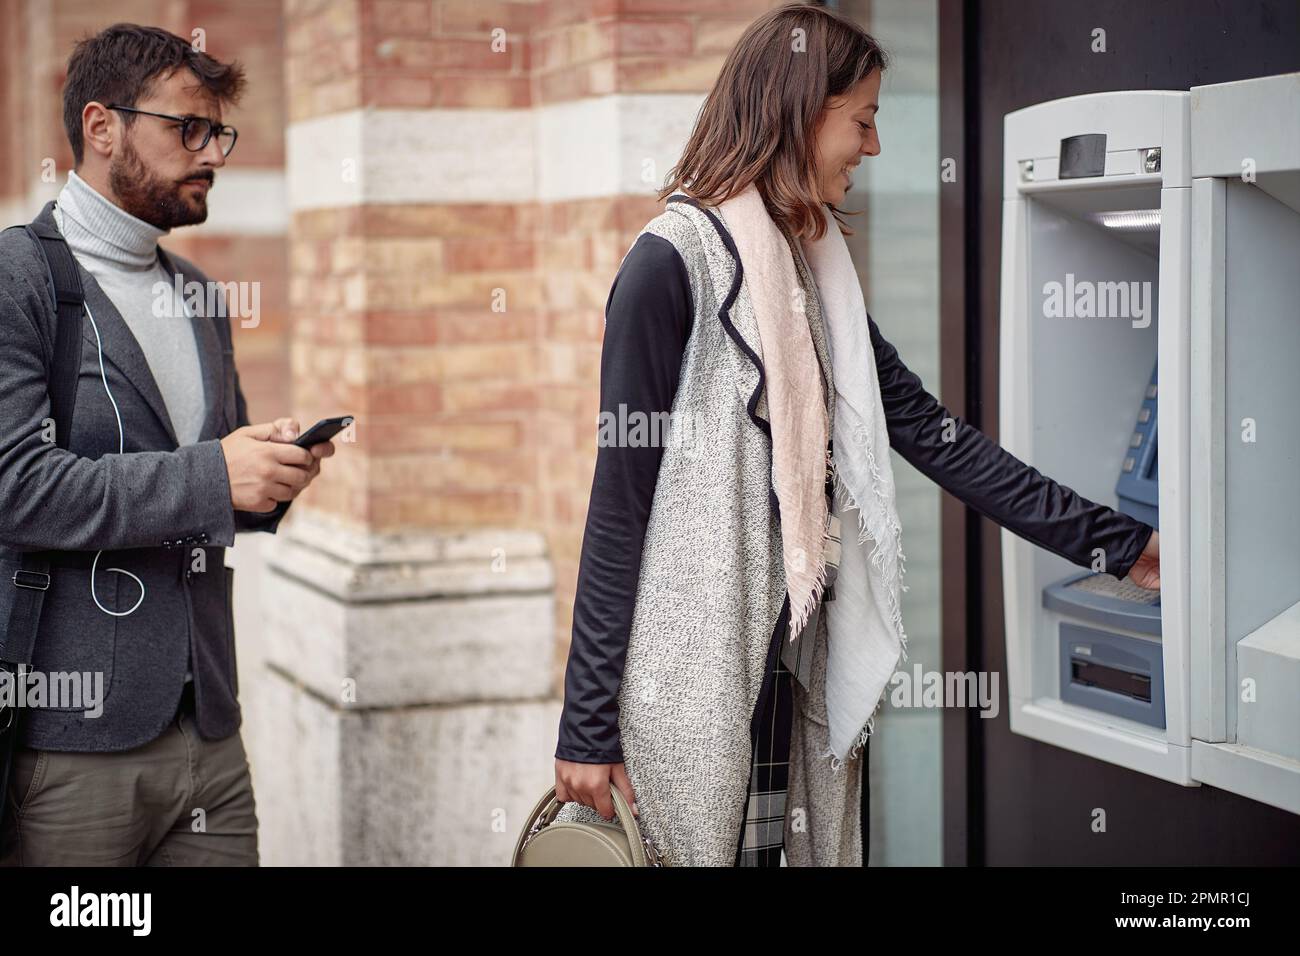 A young elegant man is impatient while waiting in a row for cash machine in a tense atmosphere. Walk, ATM, city Stock Photo